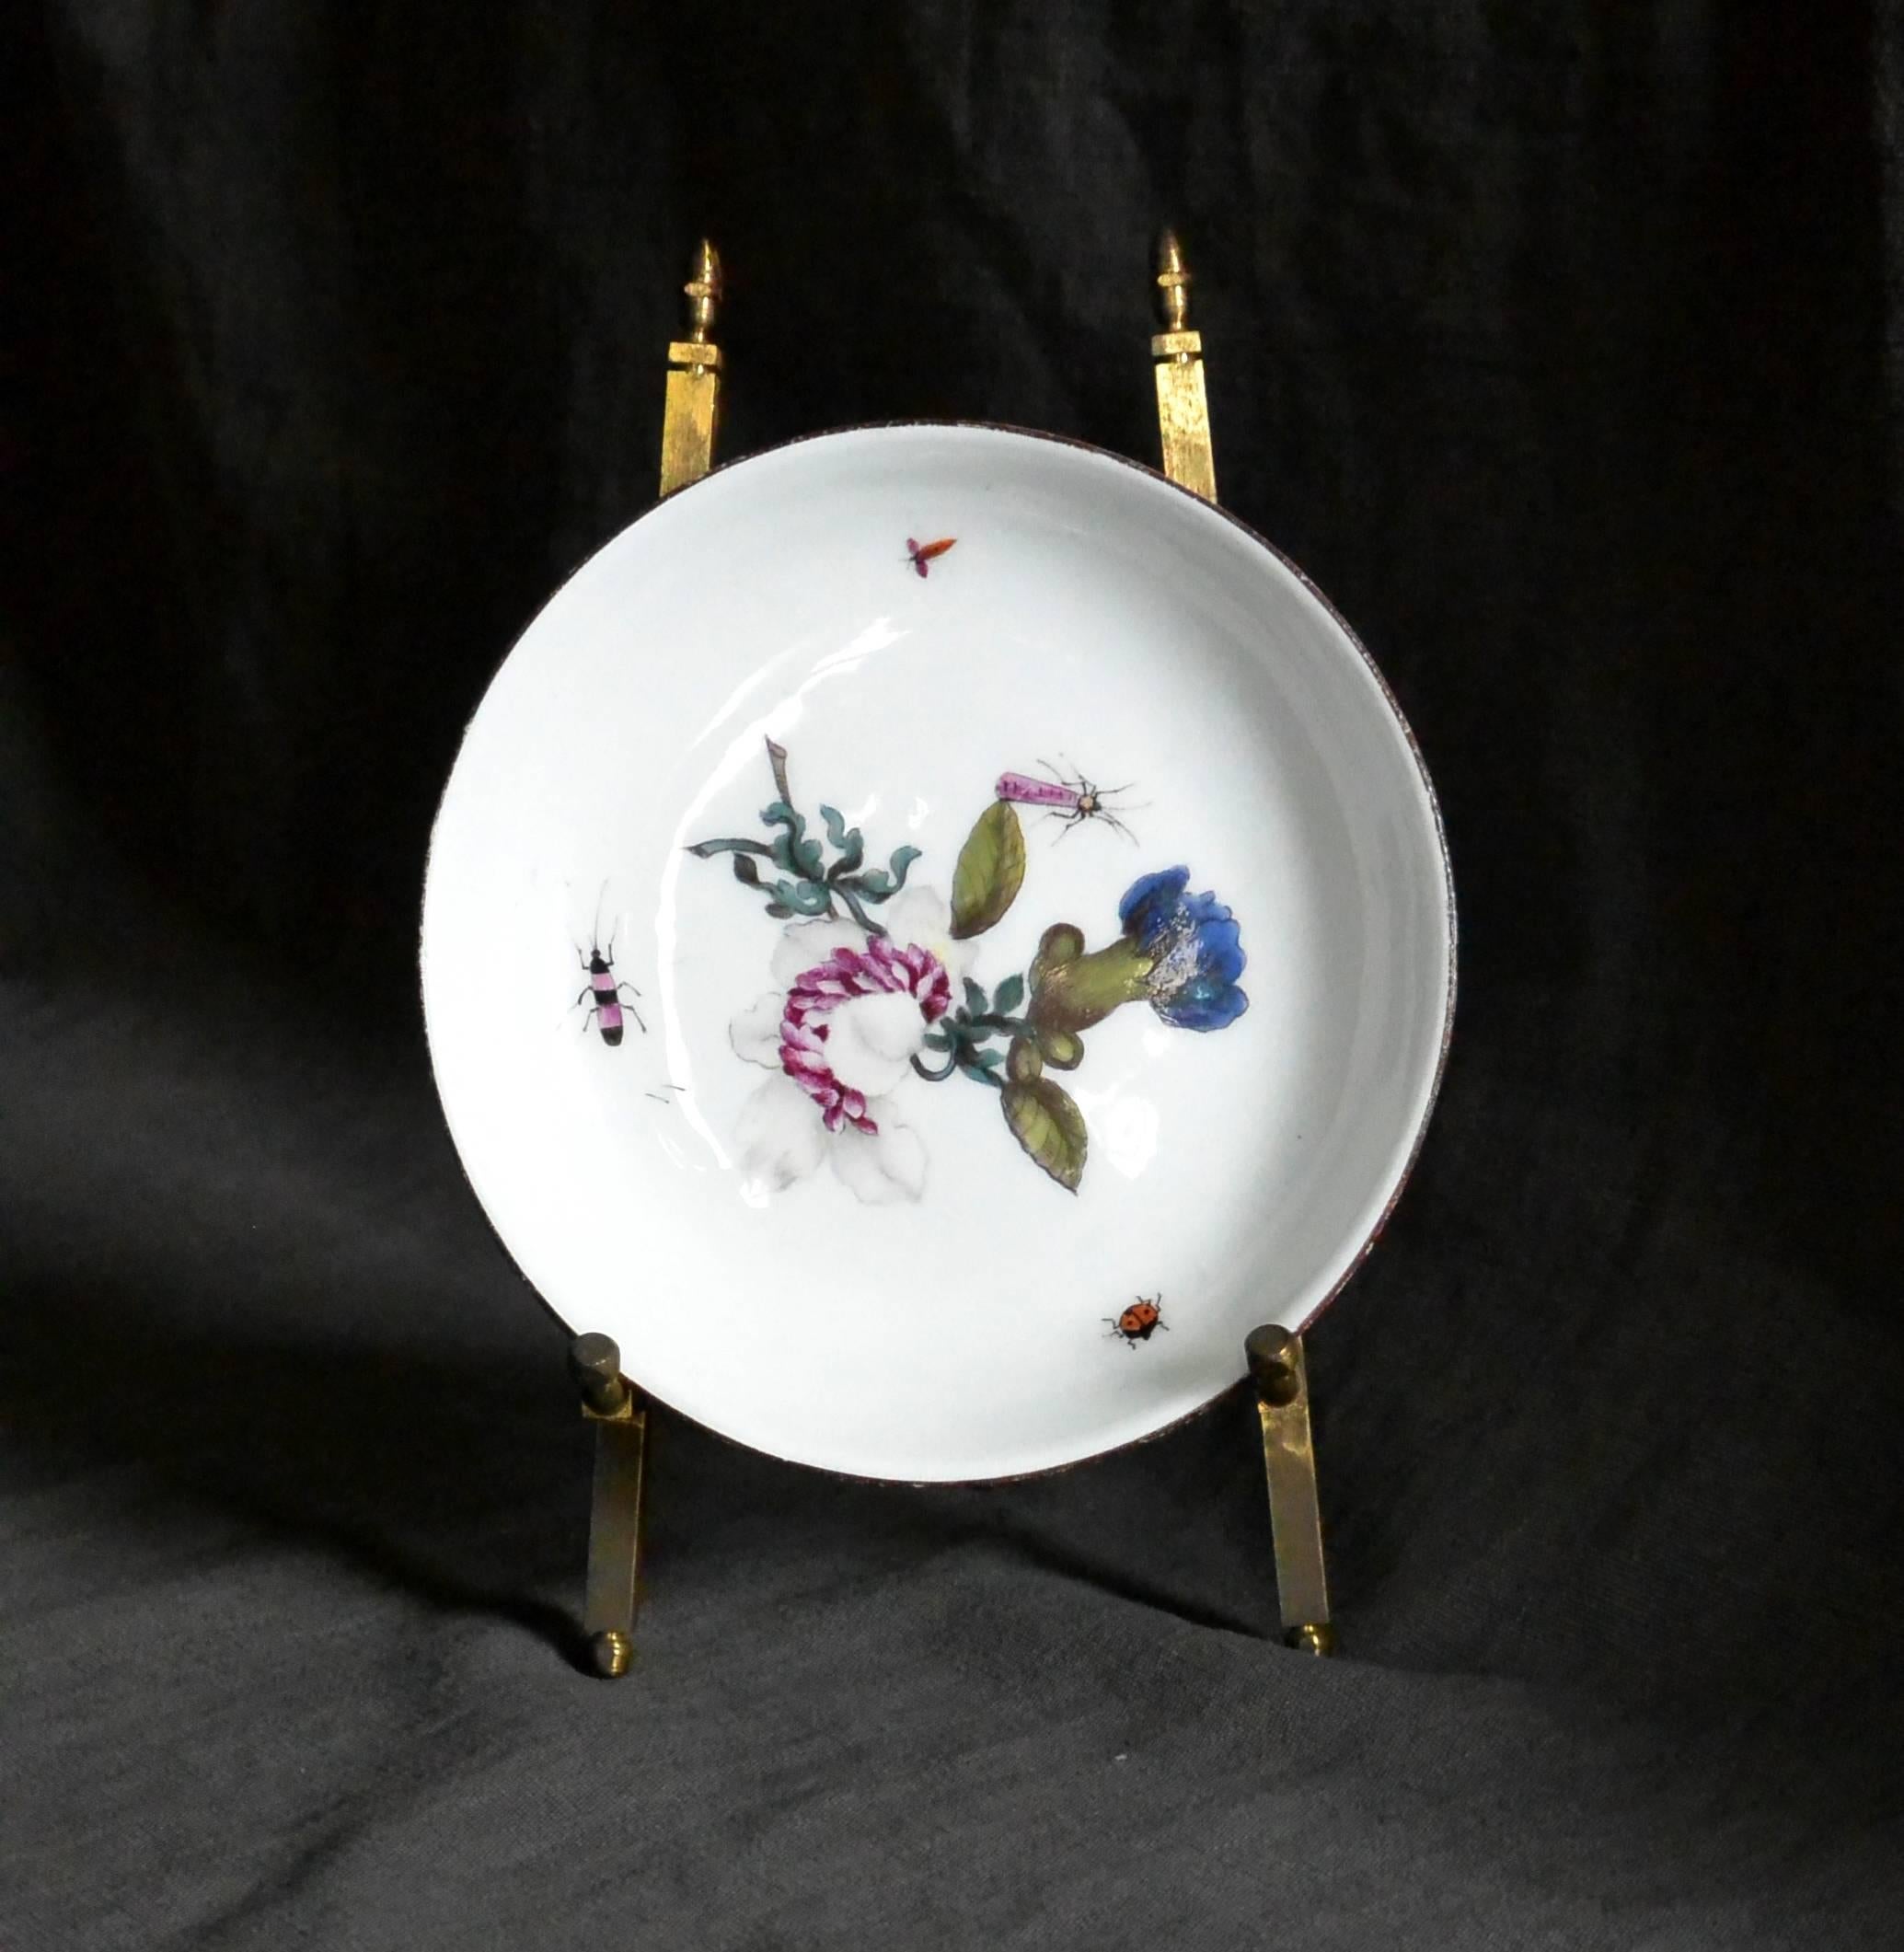 Blue and purple floral Meissen dish. Hand painted Meissen vide-poche / dish with flowers and insects, Germany, late 18th century.
Dimension: 5.13